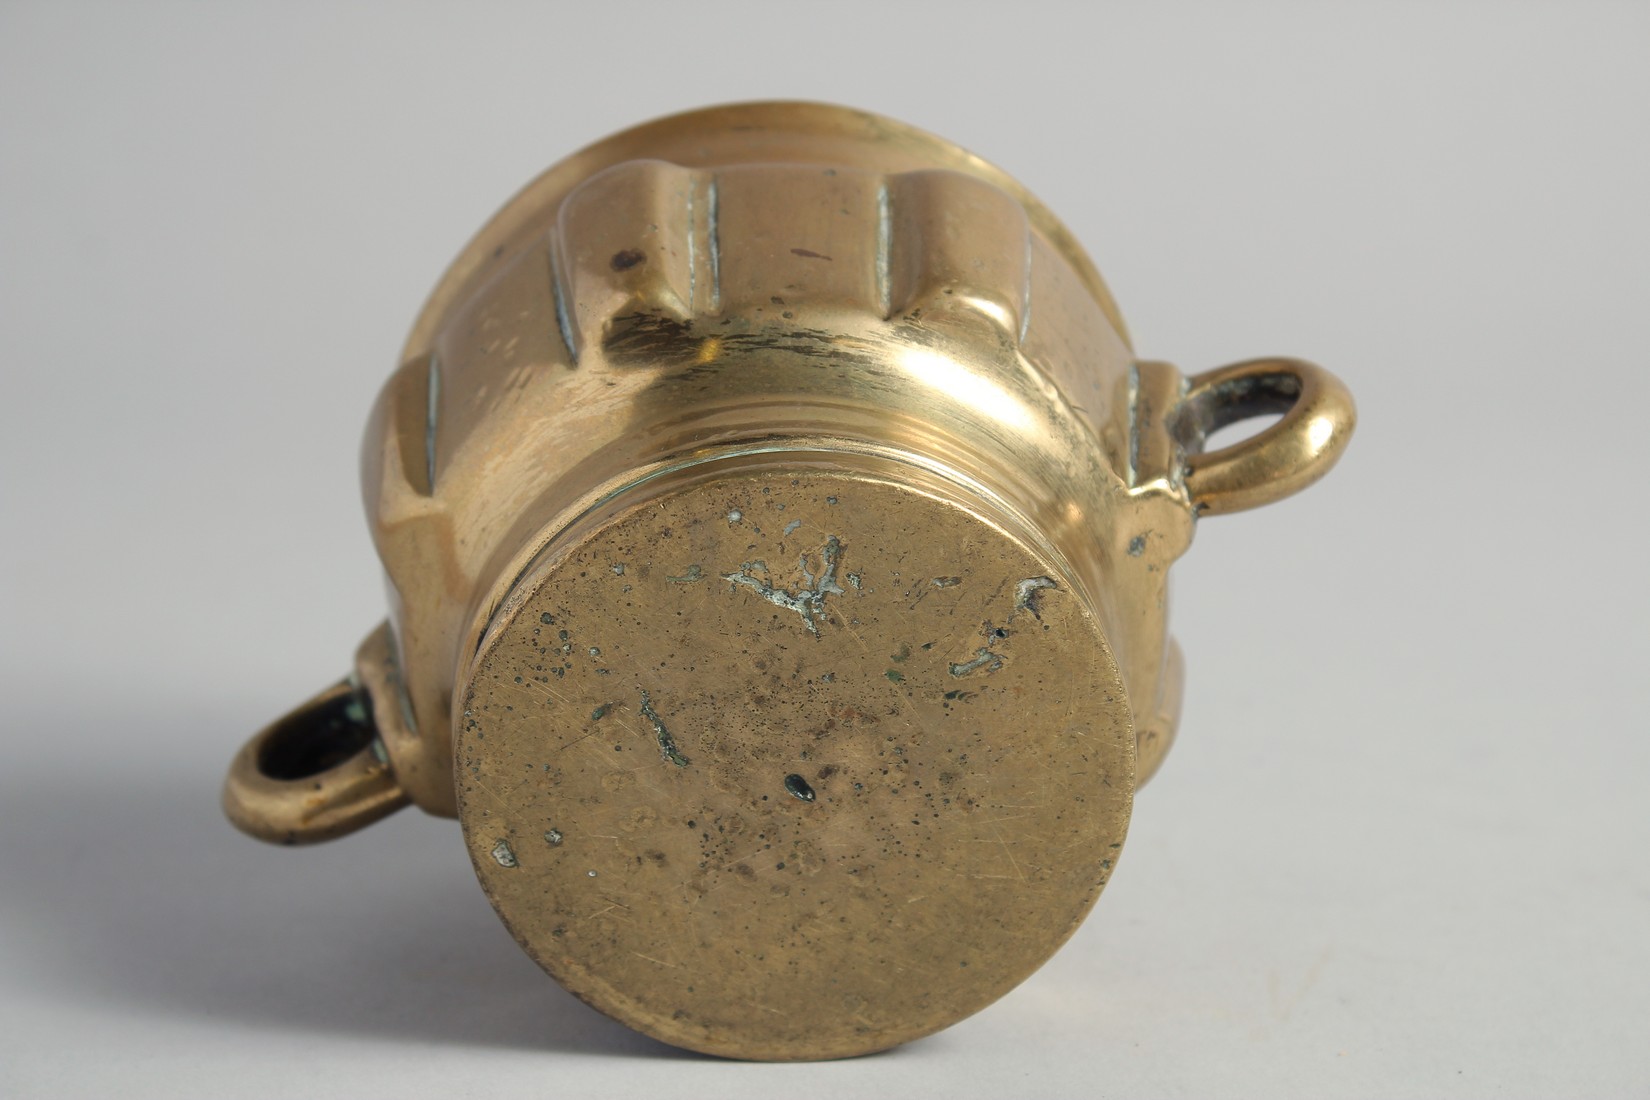 A 14TH/15TH CENTURY HISPANO MORESQUE BRASS MORTAR, with twin handles, 15cm wide (handle to handle). - Image 6 of 6